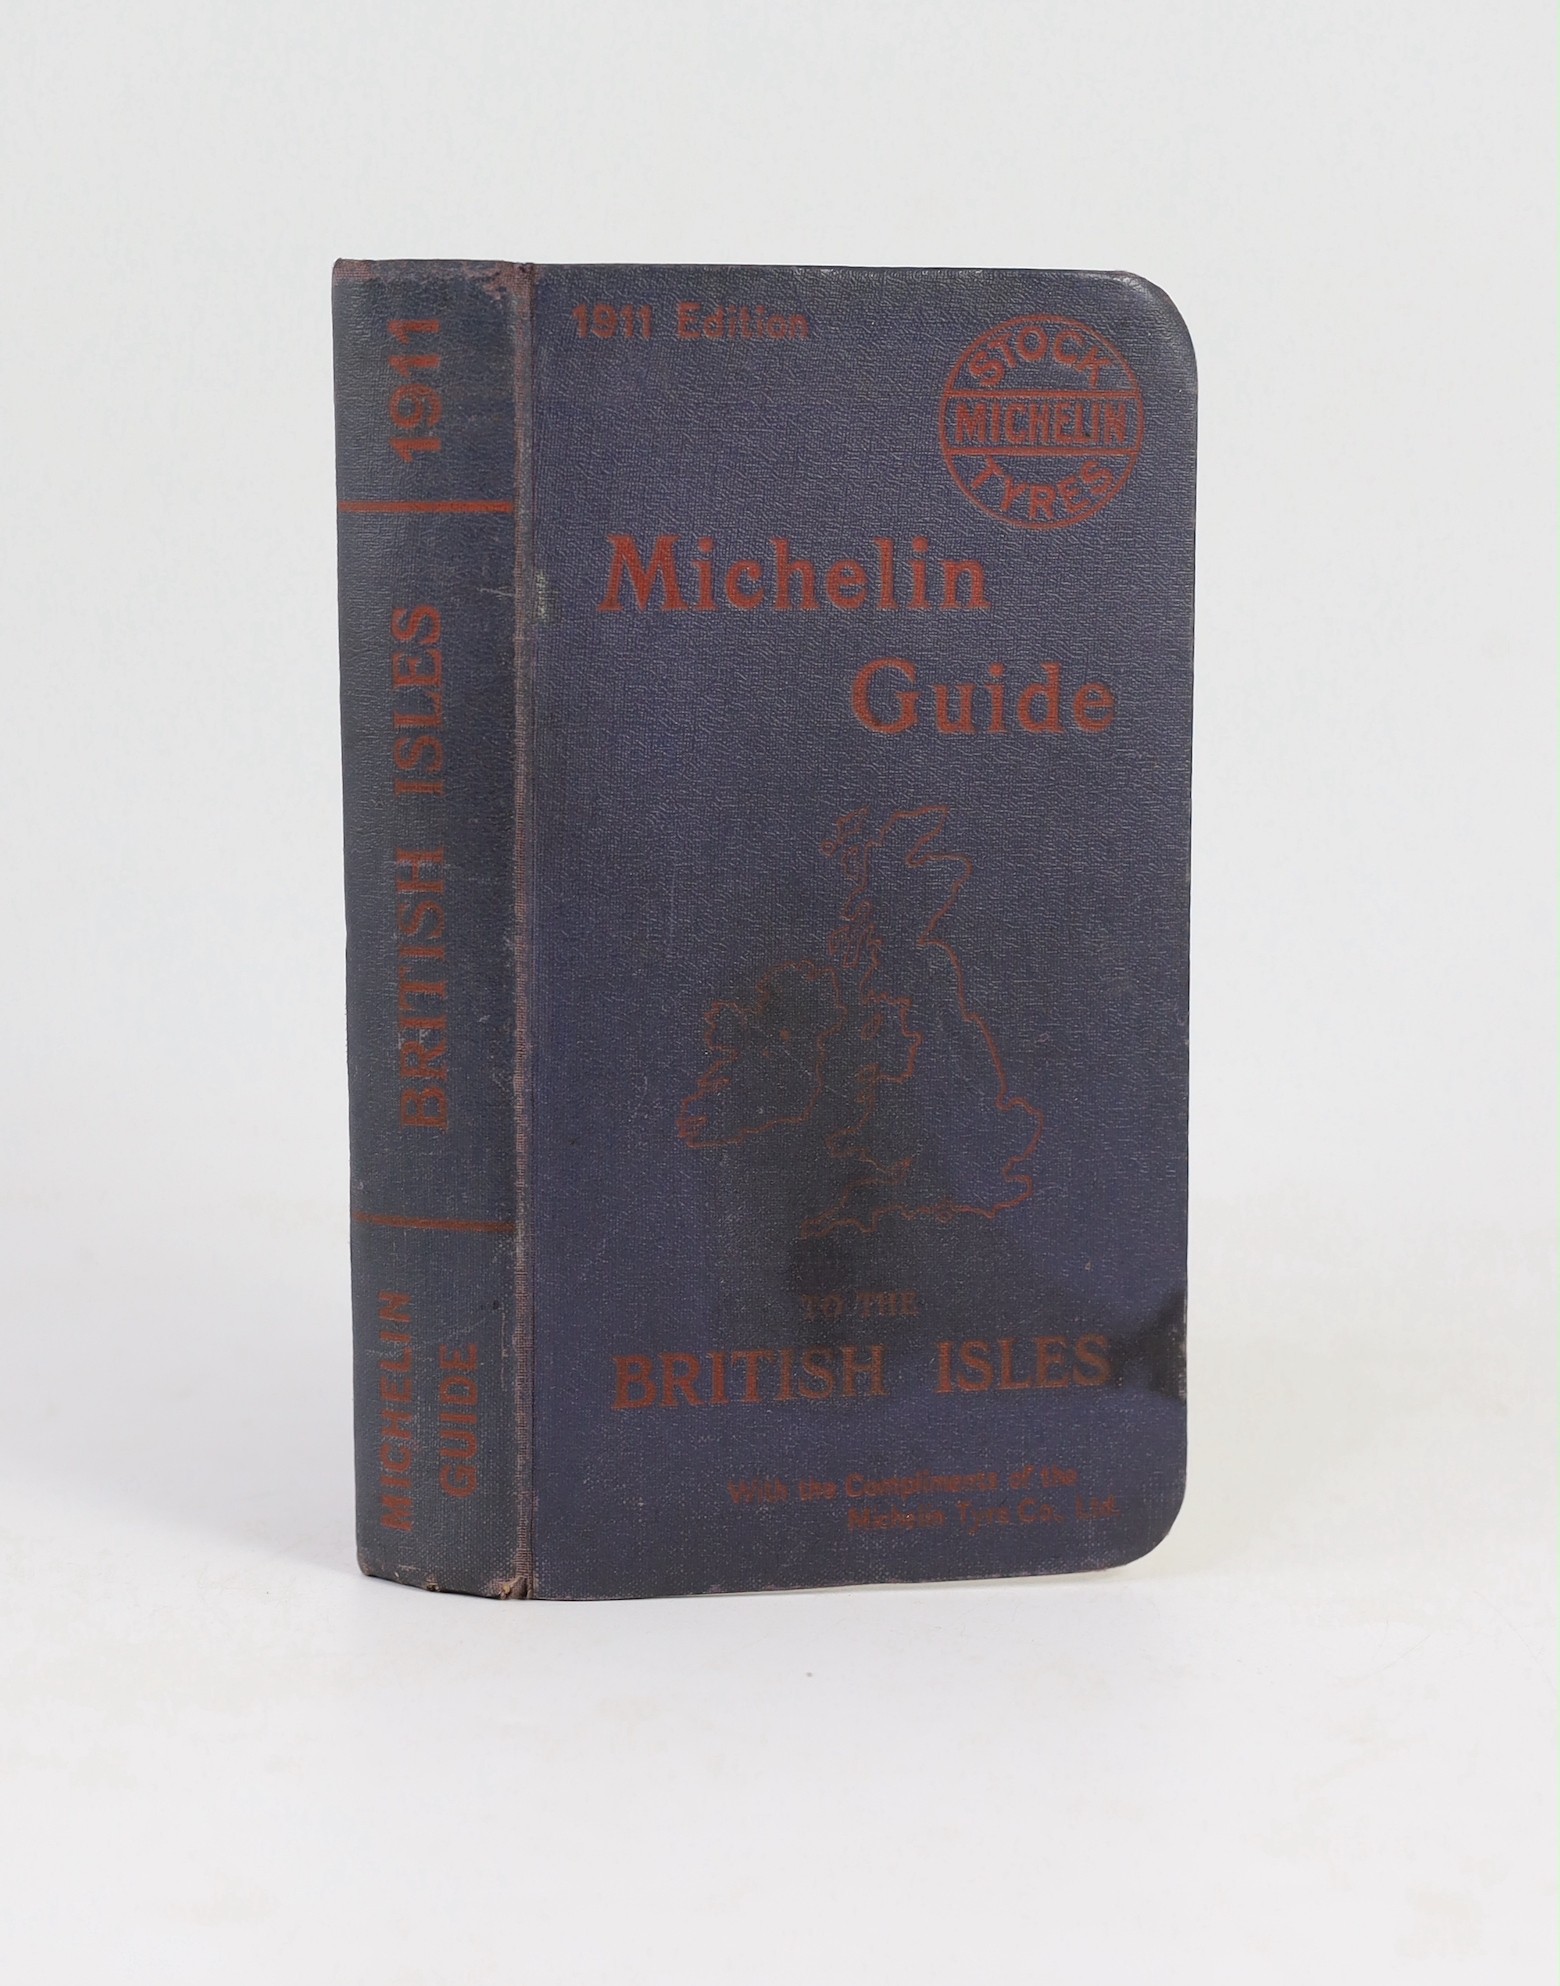 Michelin Guide to the British Isles, 8vo, pictorial cloth, 1911